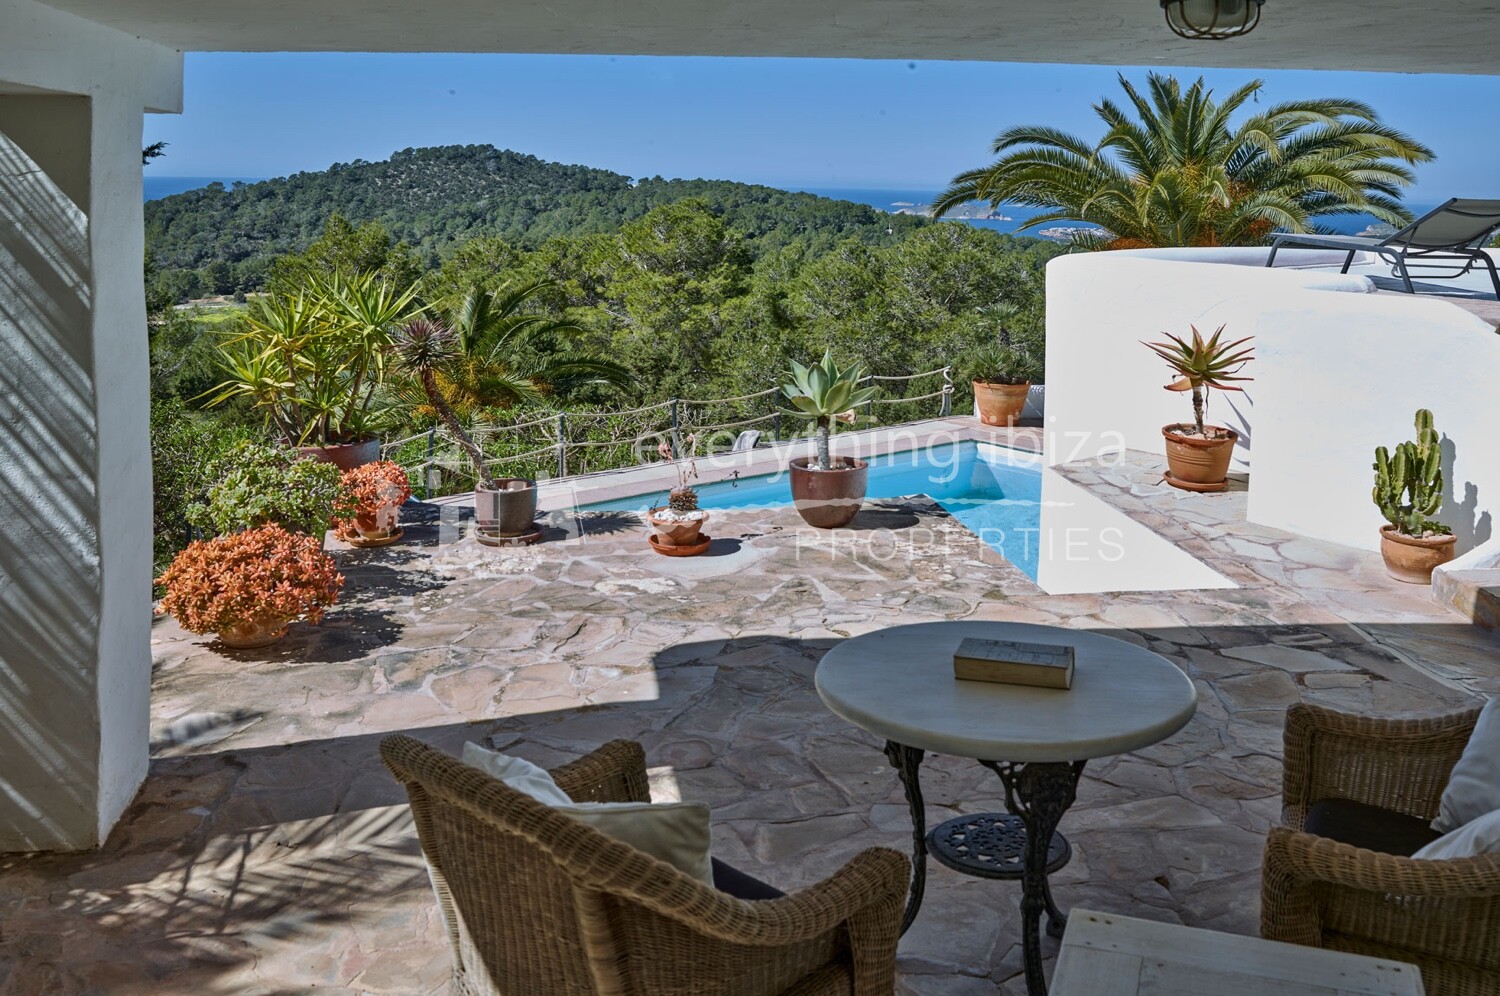 Elegant Detached Villa with Guest House & Super Views, ref. 1632, for sale in Ibiza by everything ibiza Properties